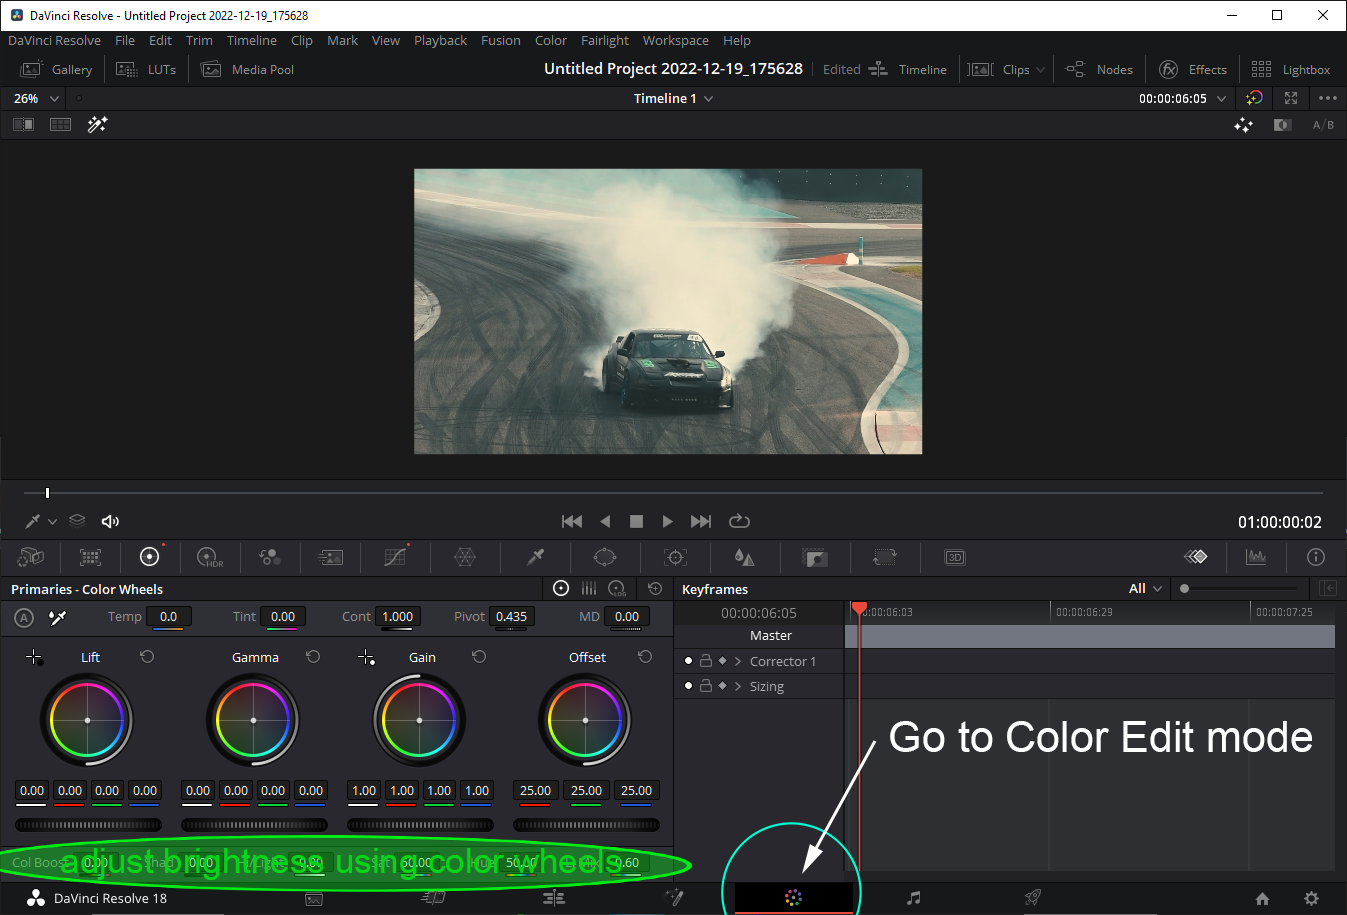 How to increase brightness of your video clip in DaVinci Resolve 18